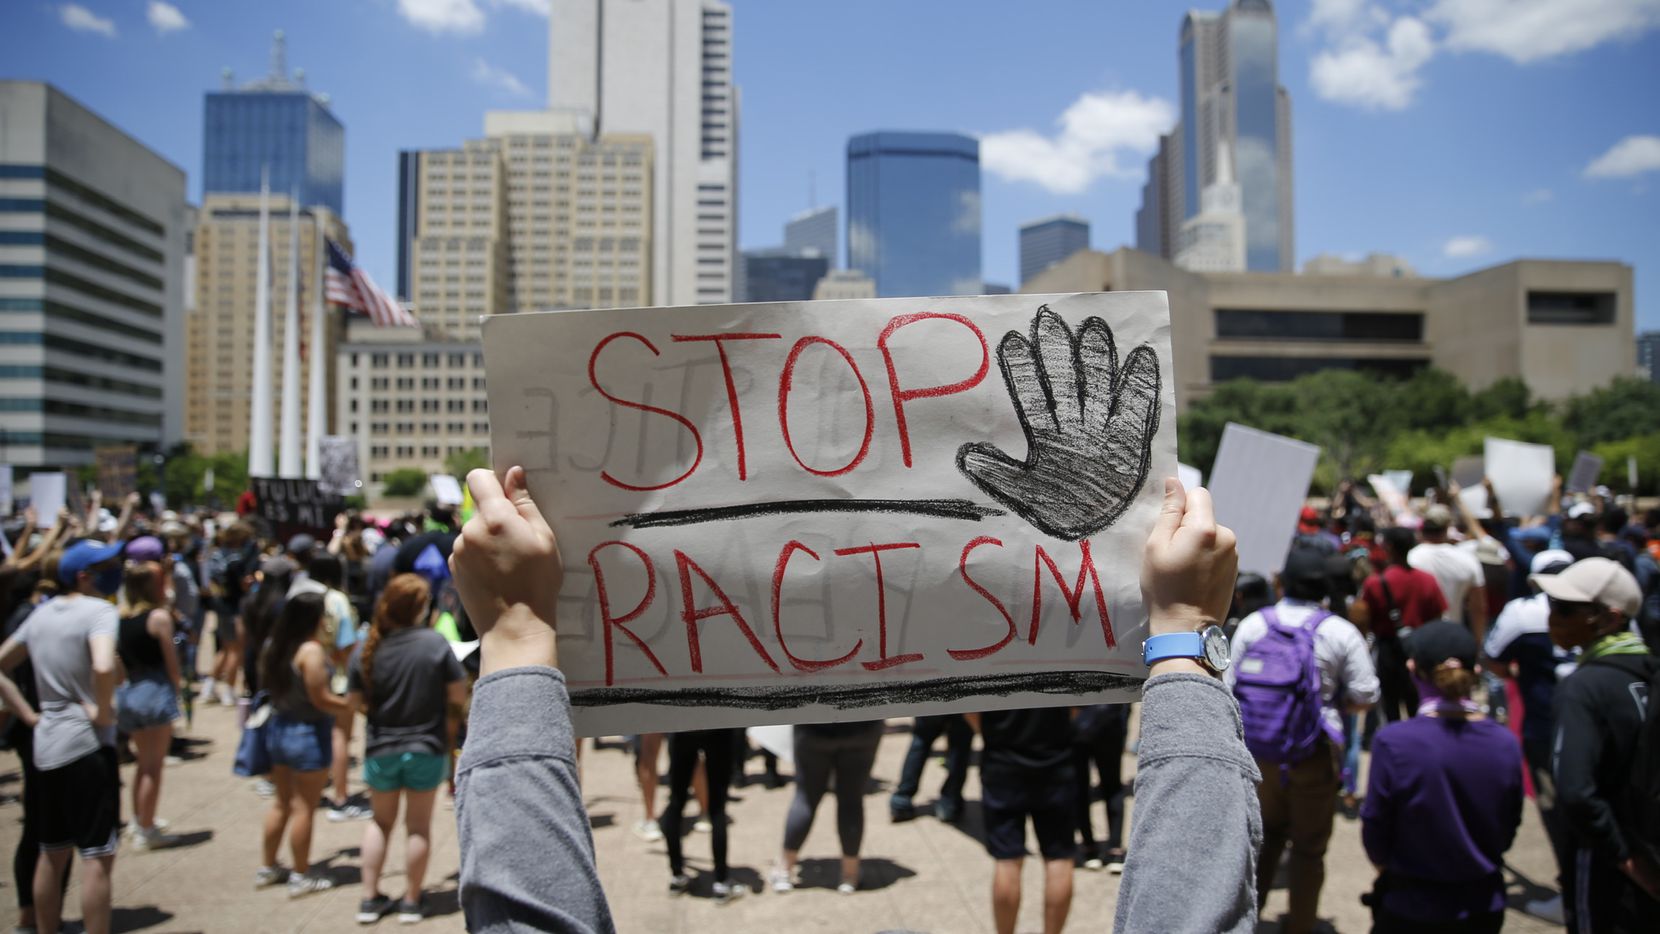 Demonstrators gathered in downtown Dallas on Saturday to rally against police brutality.